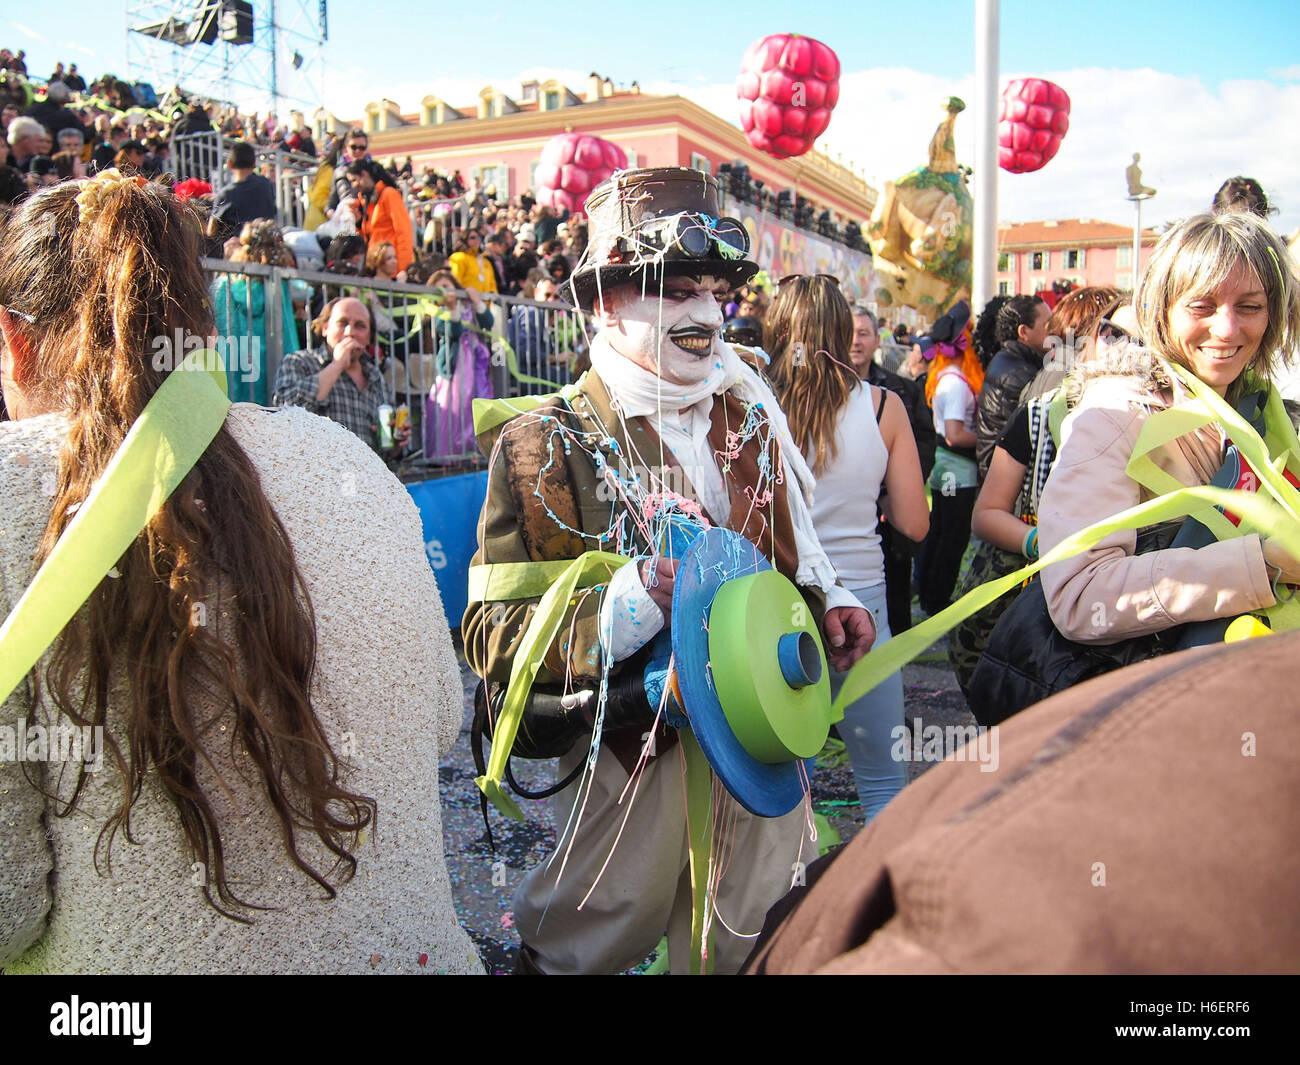 Disguised man teasing people at Nice Carnival Stock Photo